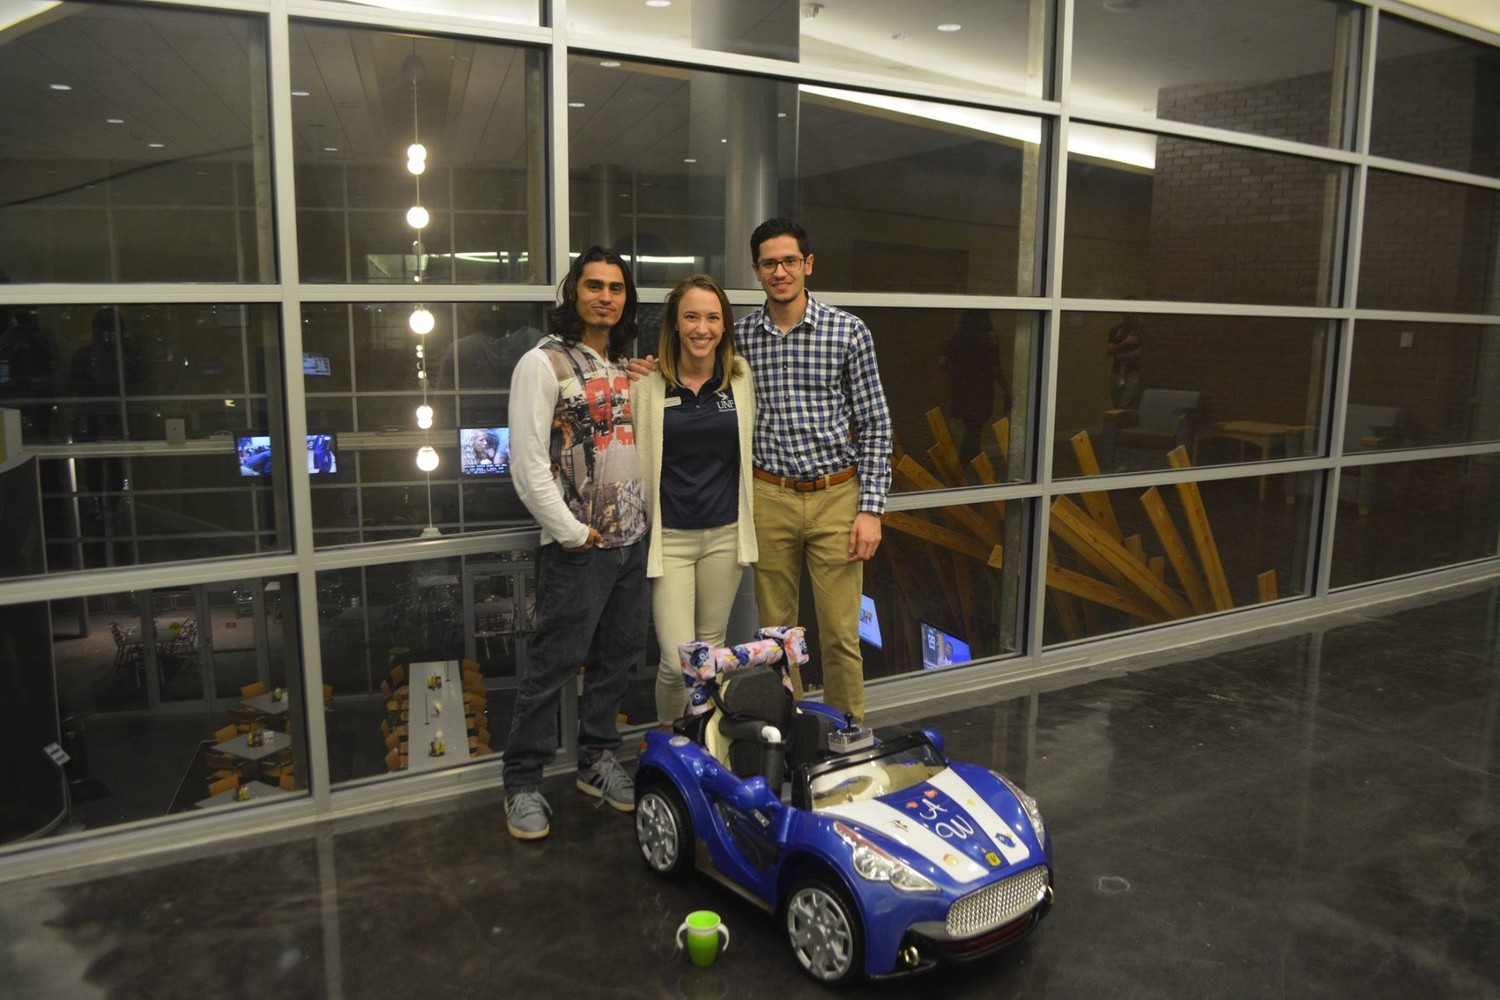 Husam Safar (right) poses for a picture with his teammates, behind their toy car creation.